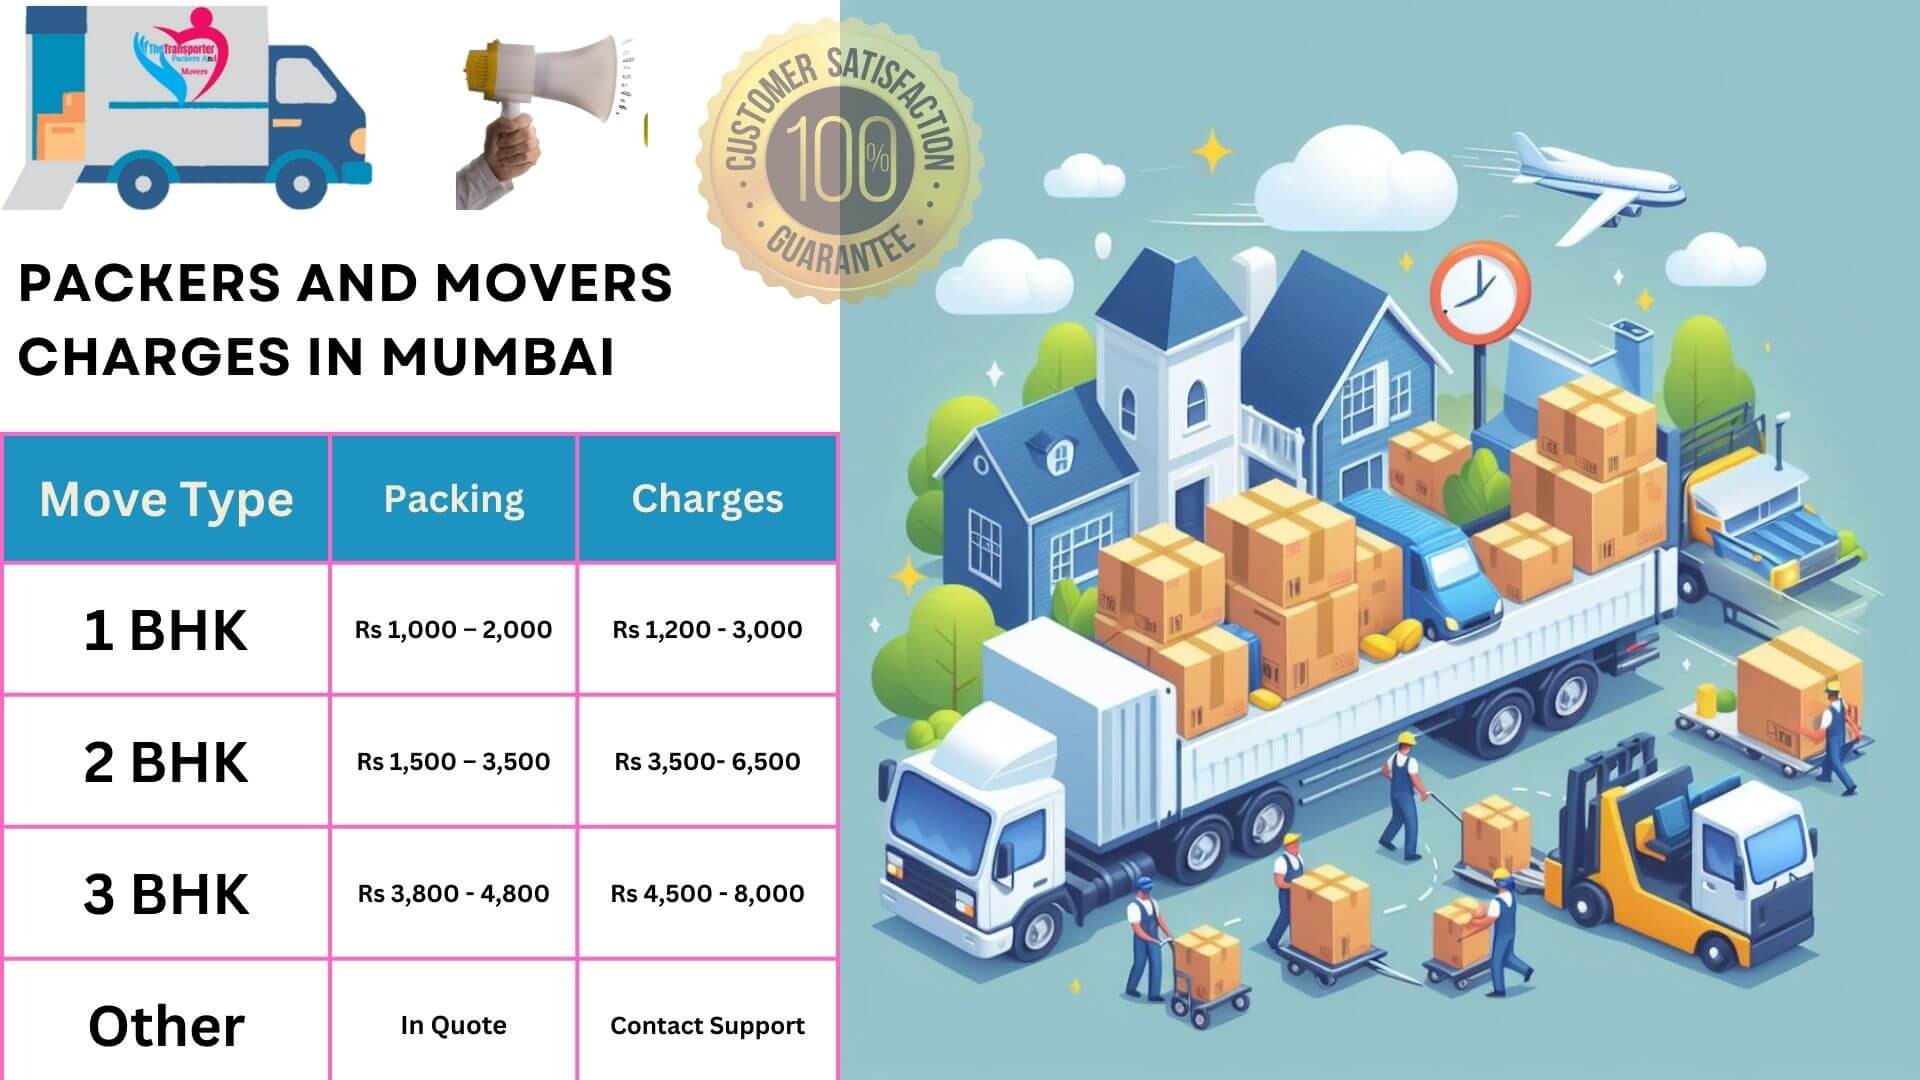 TheTransporter Packers and movers Charges list in Mumbai 